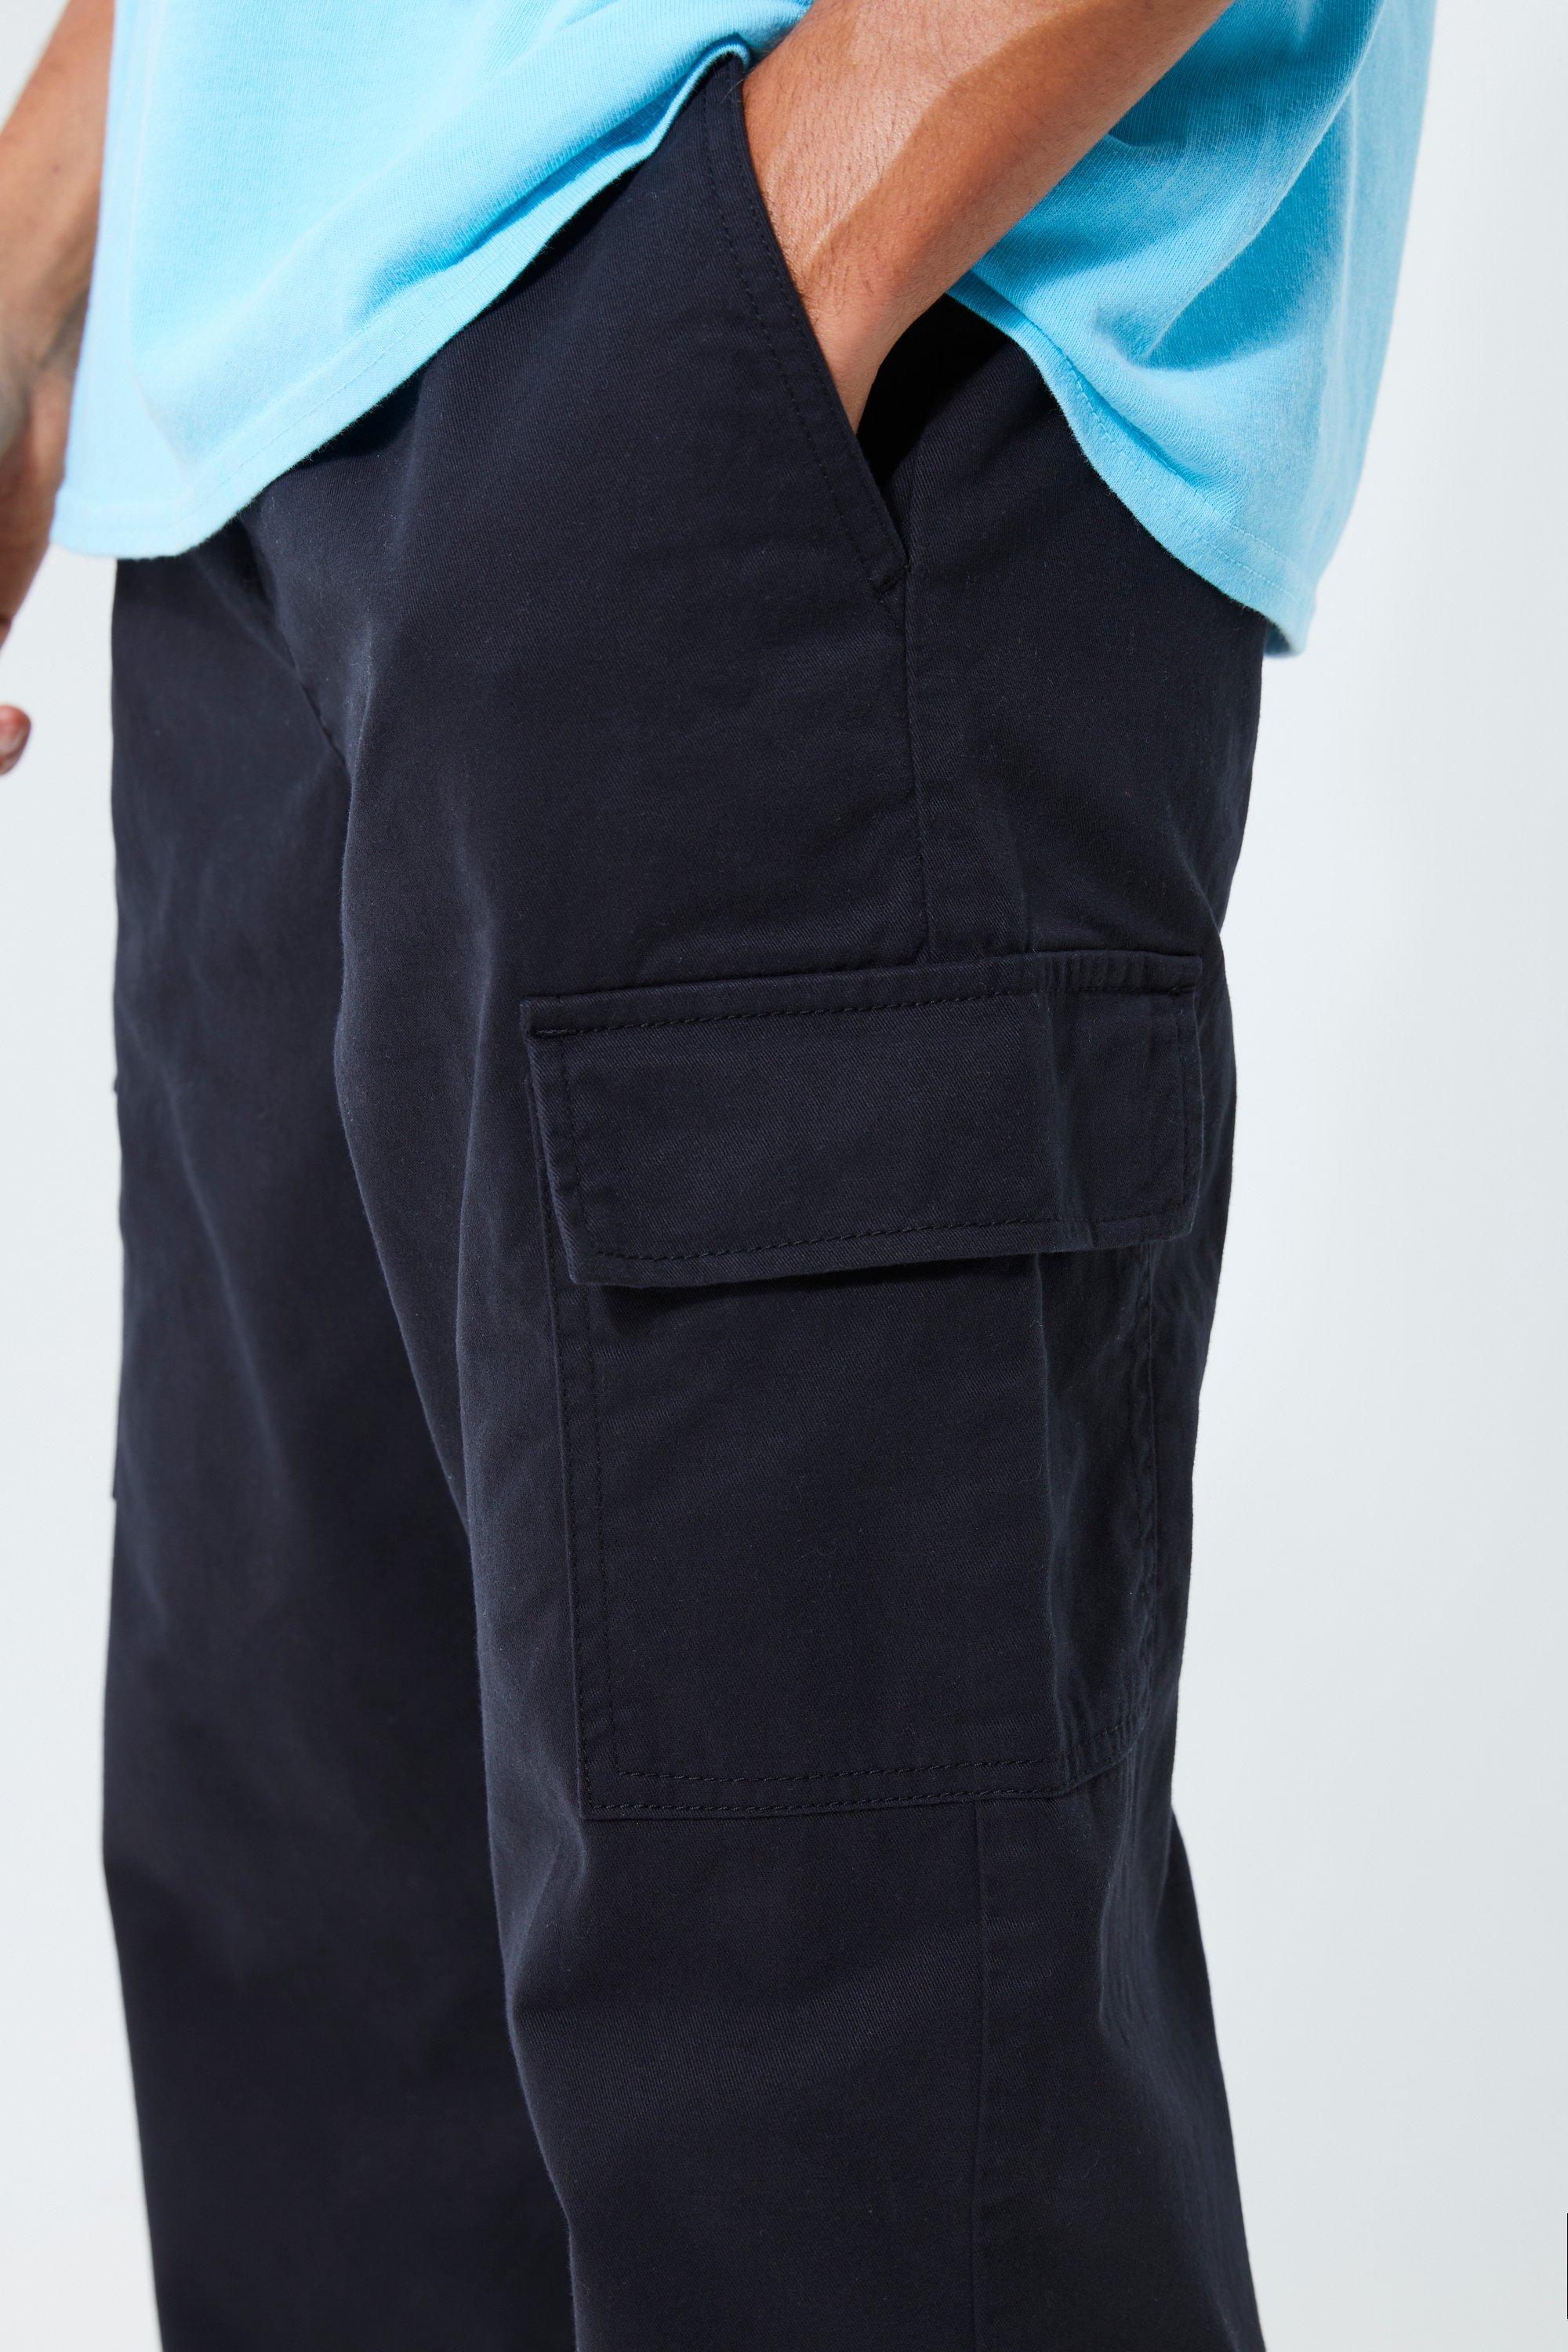 Relaxed Fit Cargo trousers, Dark Blue